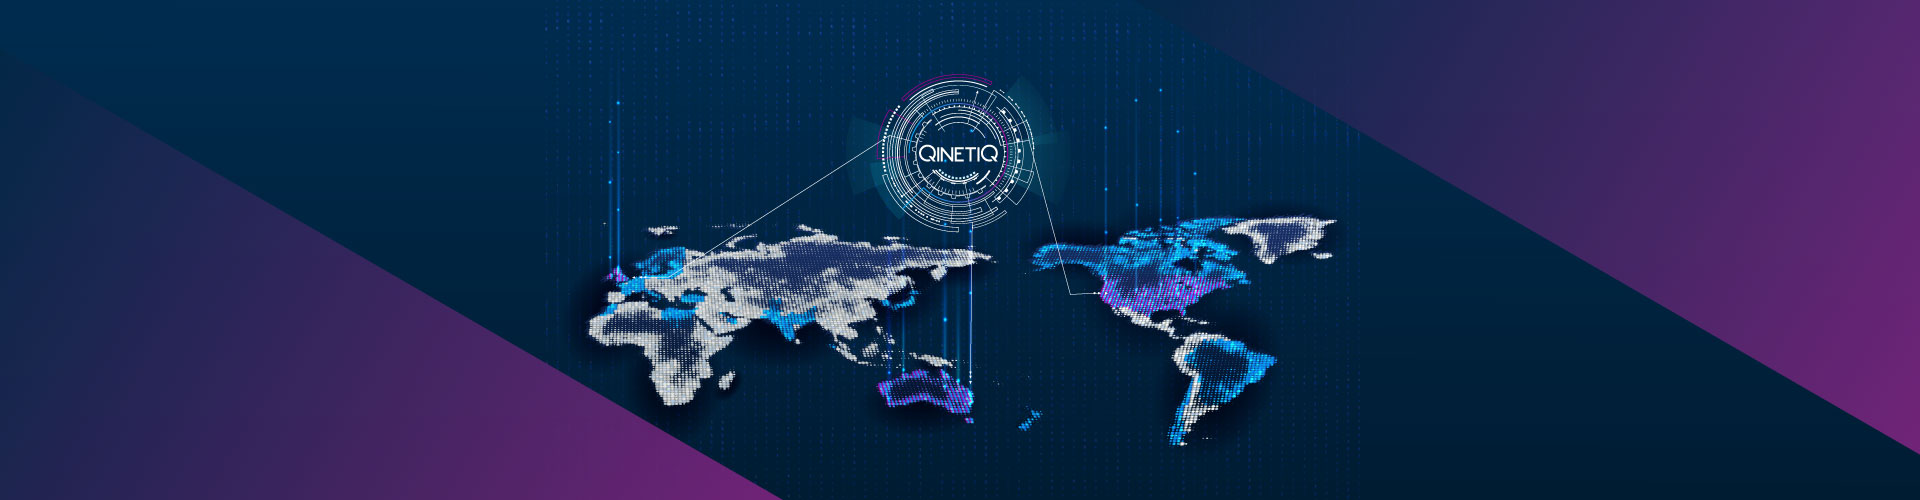 Graphic of the world map pinpointing QinetiQ locations